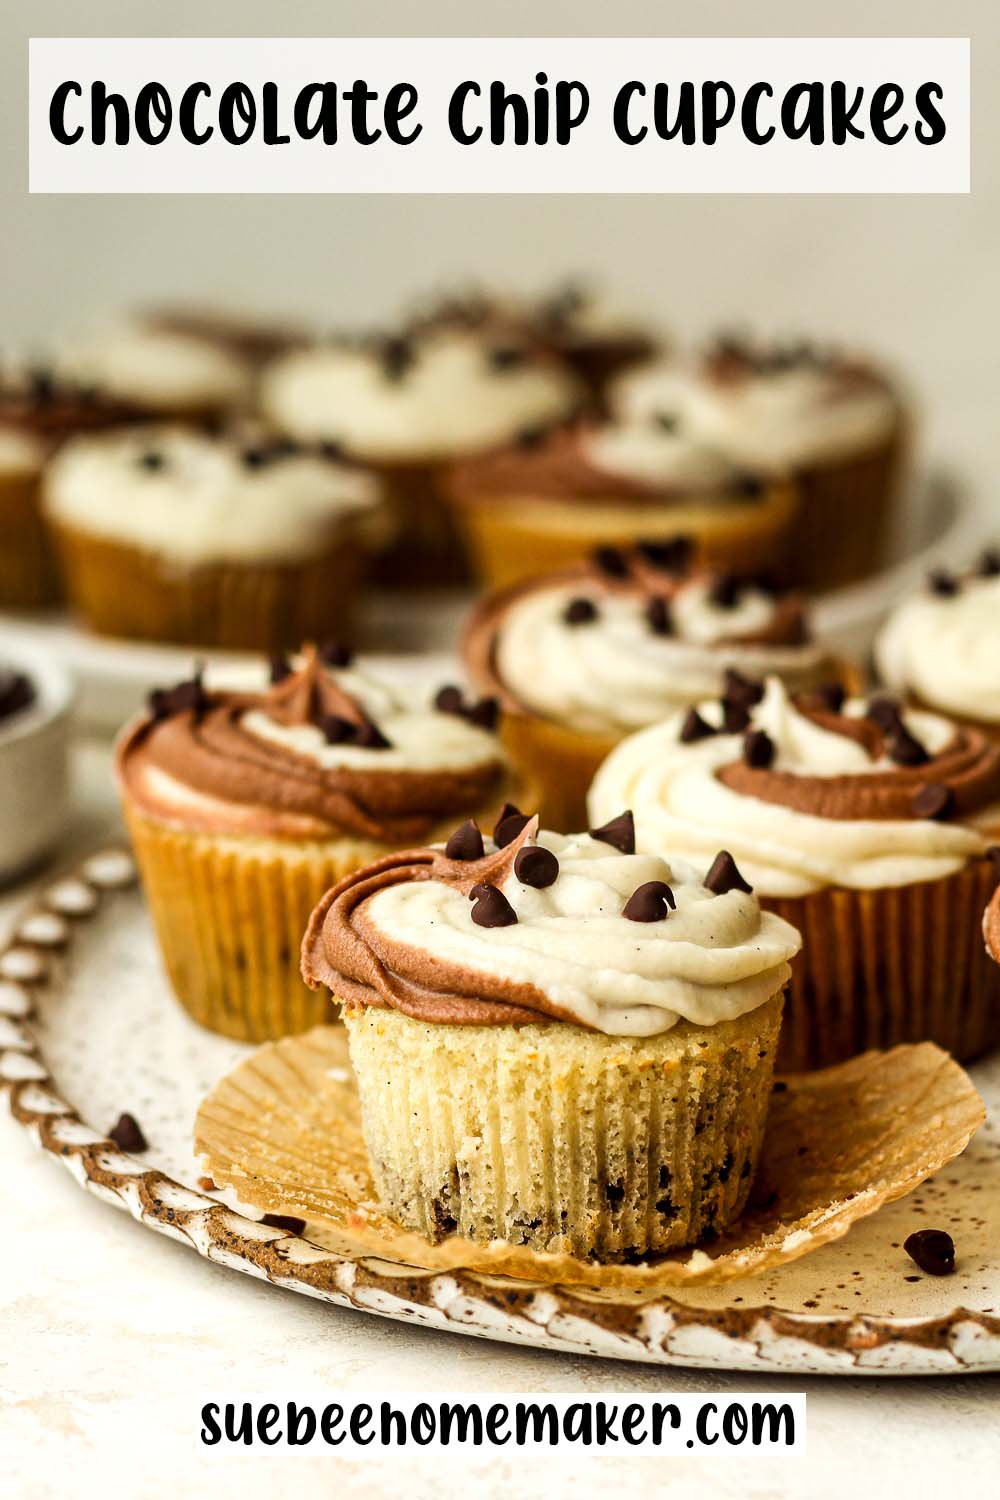 Side view of a plate of chocolate chip cupcakes with swirl buttercream.